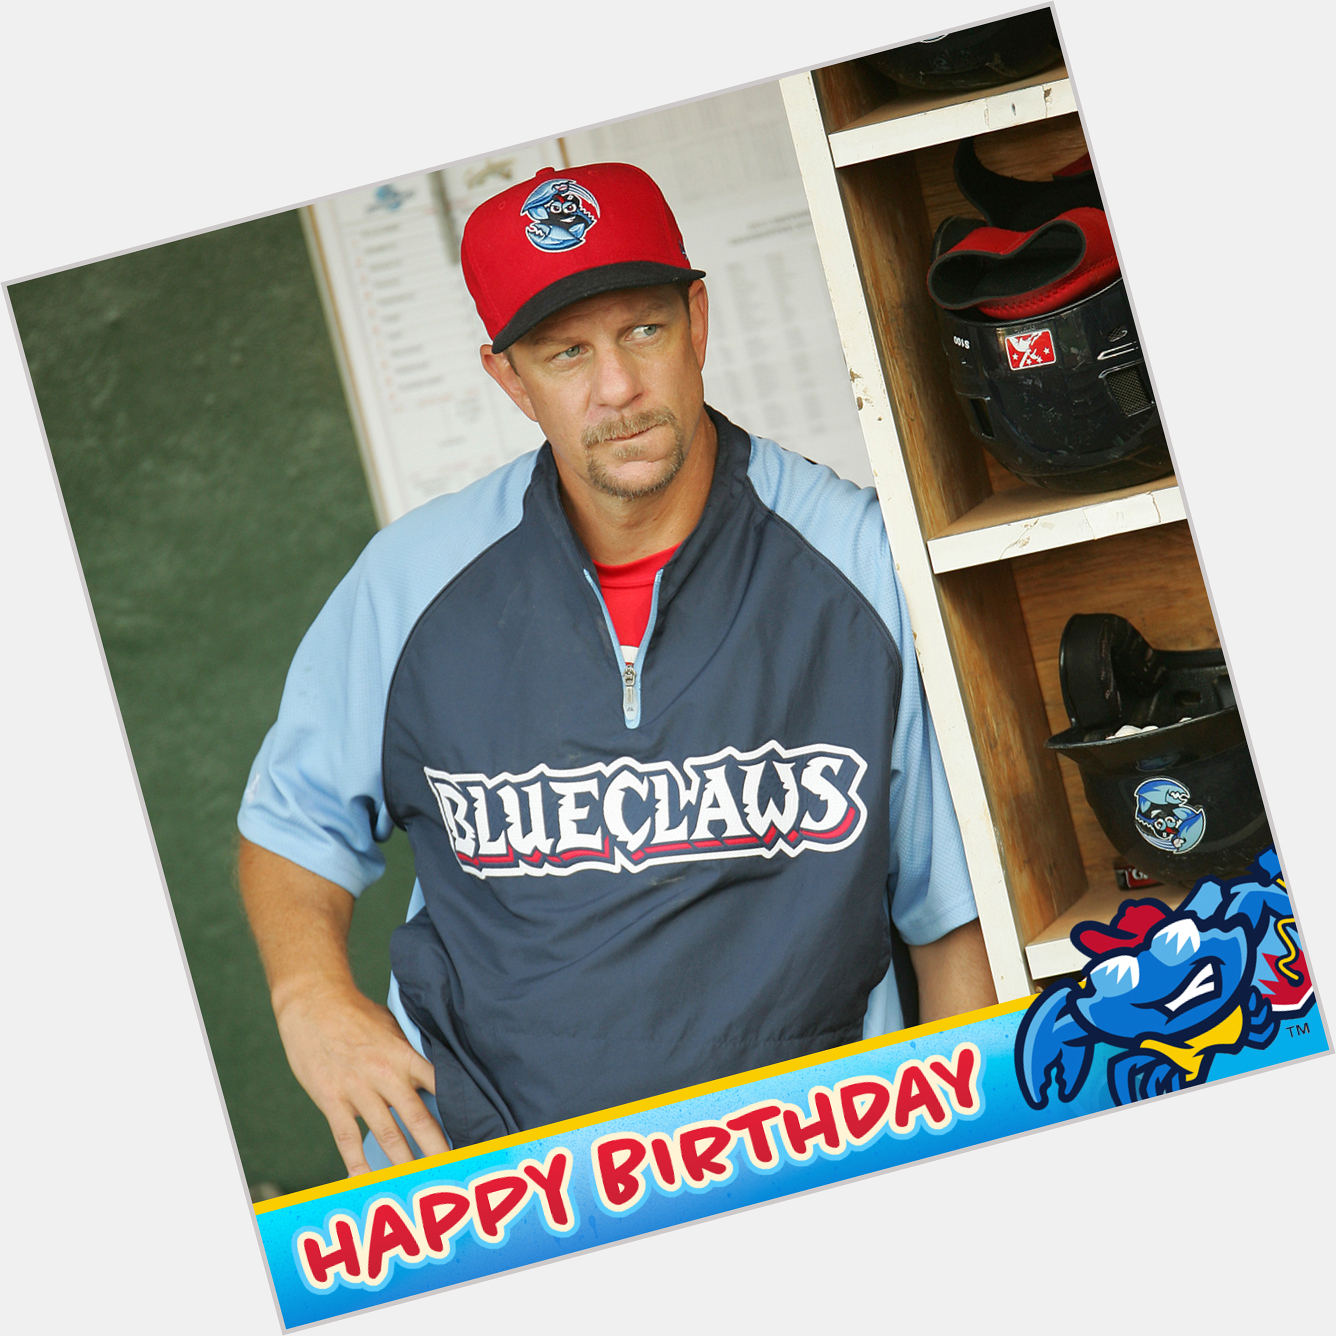 Join us in wishing a very Happy Birthday to legend and former BlueClaws manager Mickey Morandini! 